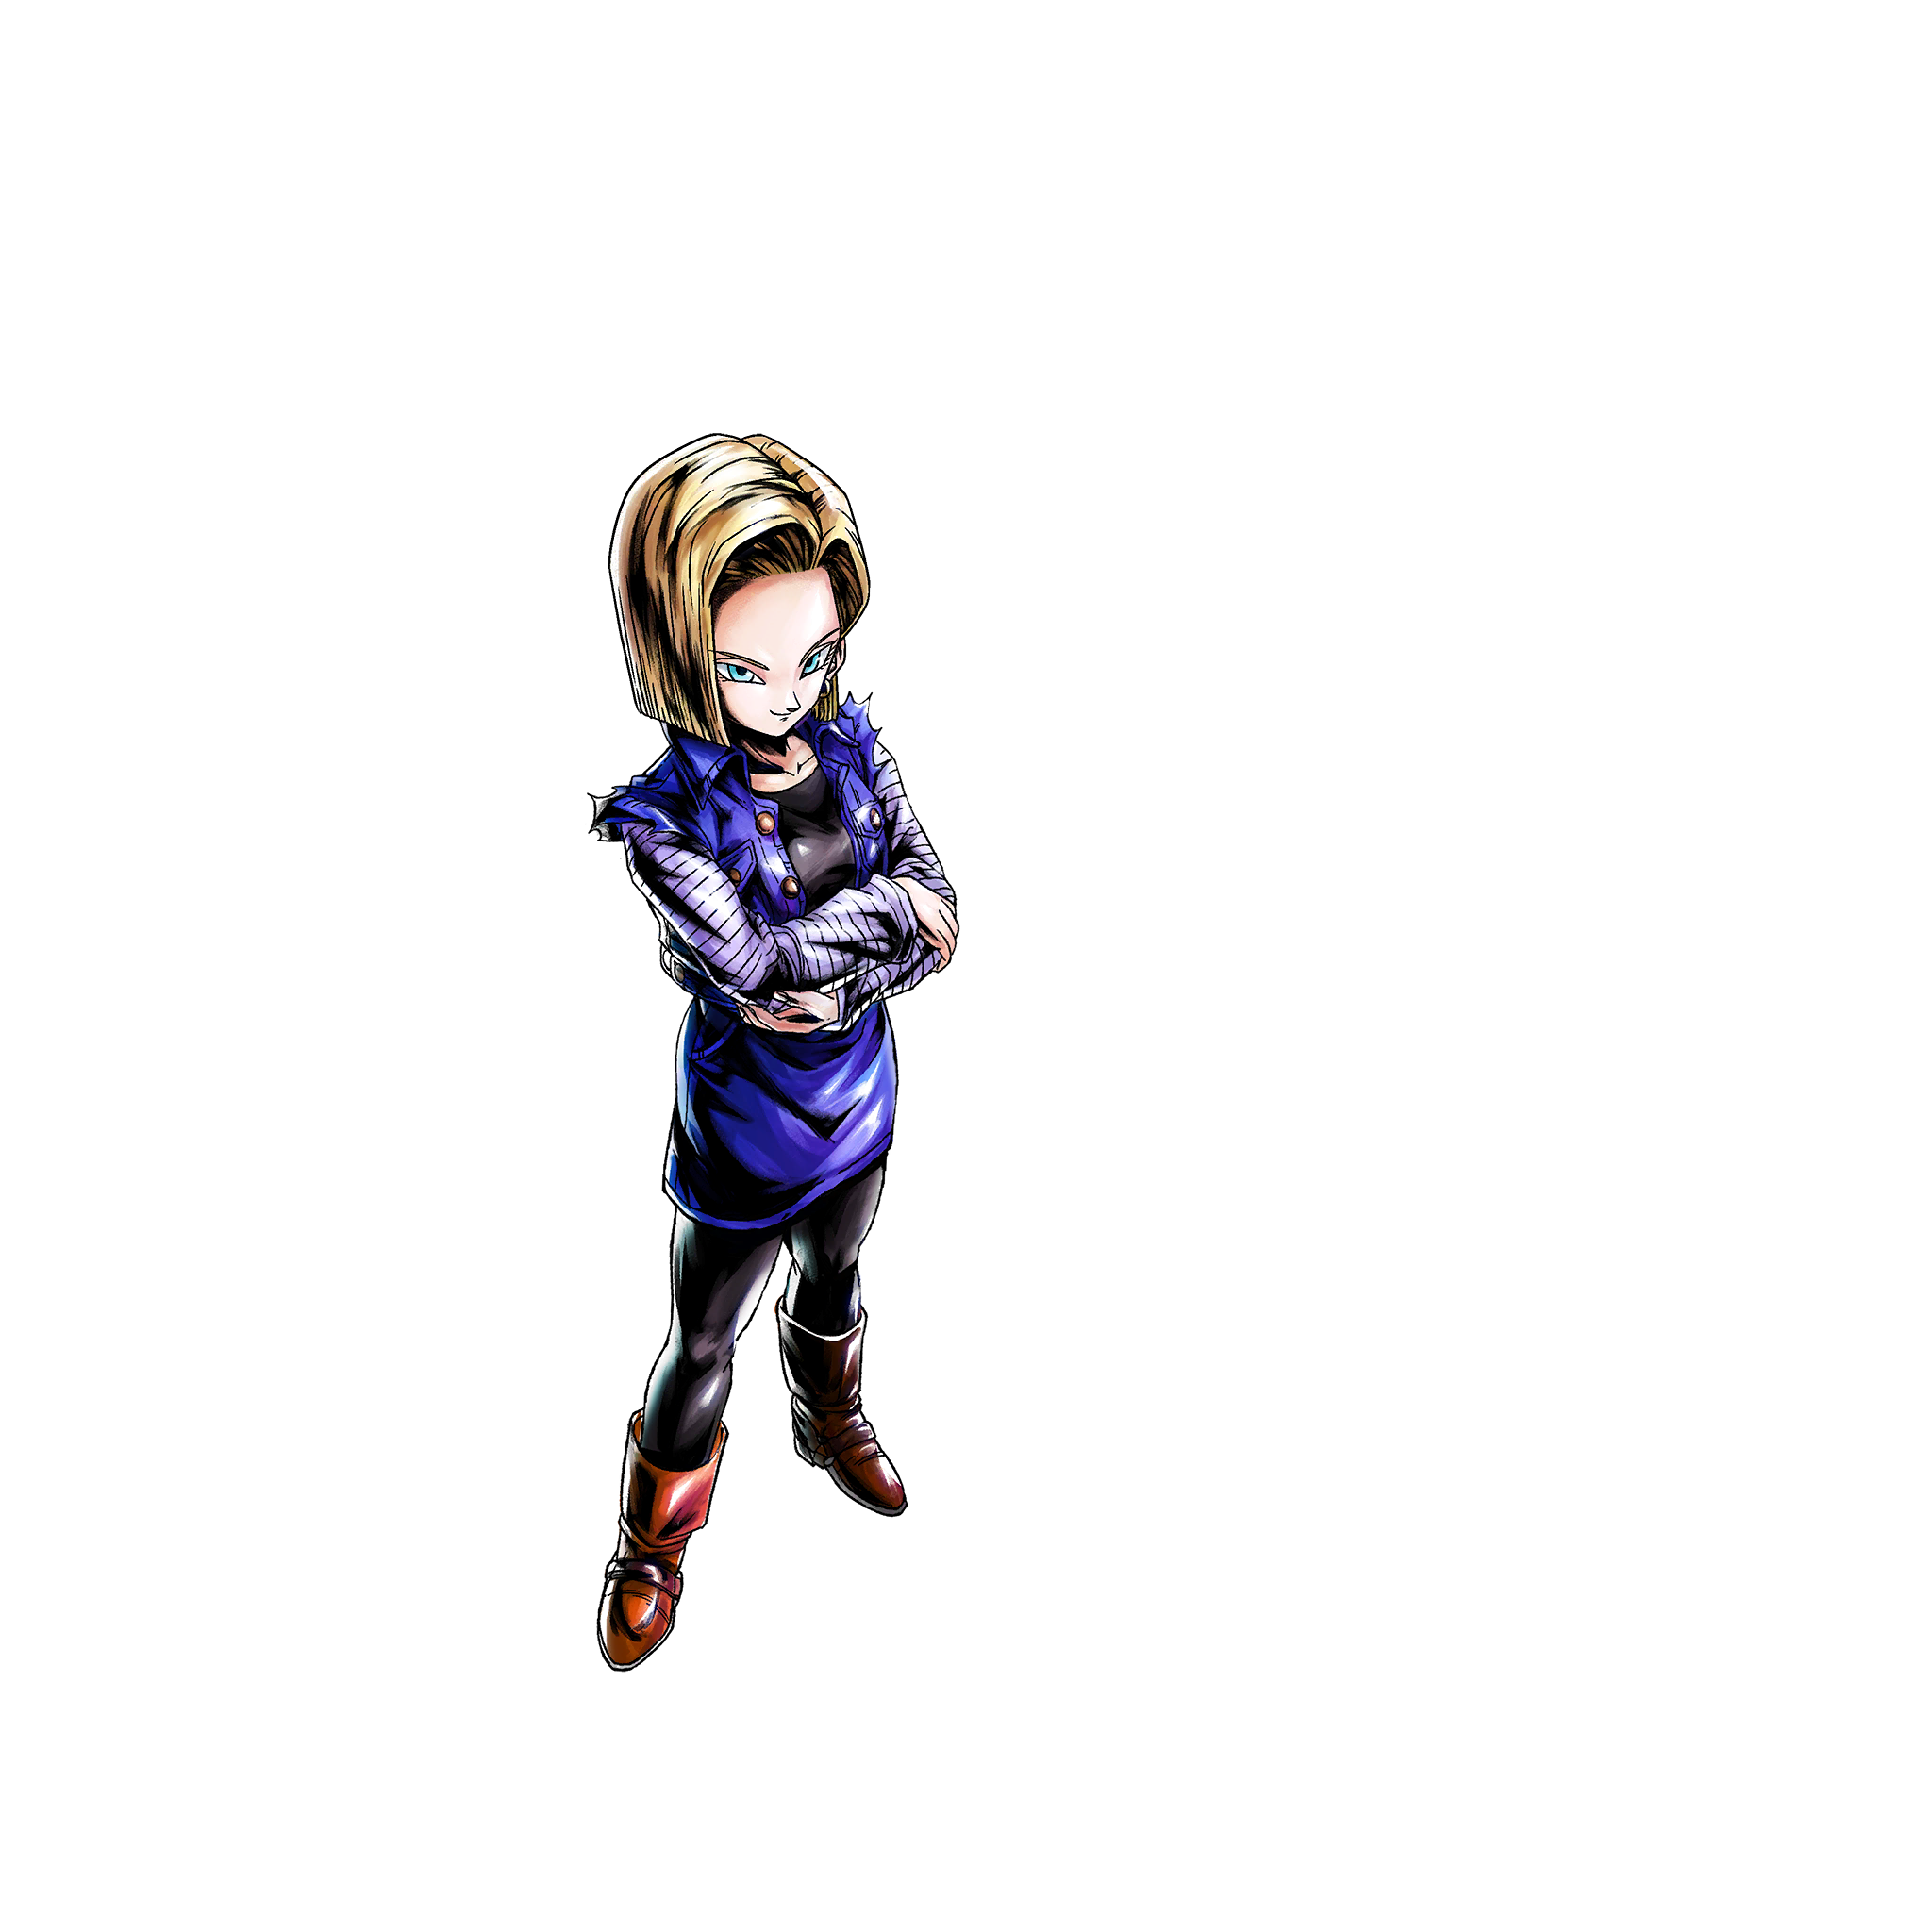 Android #17 & Android #18 (DBL46-01S), Characters, Dragon Ball Legends